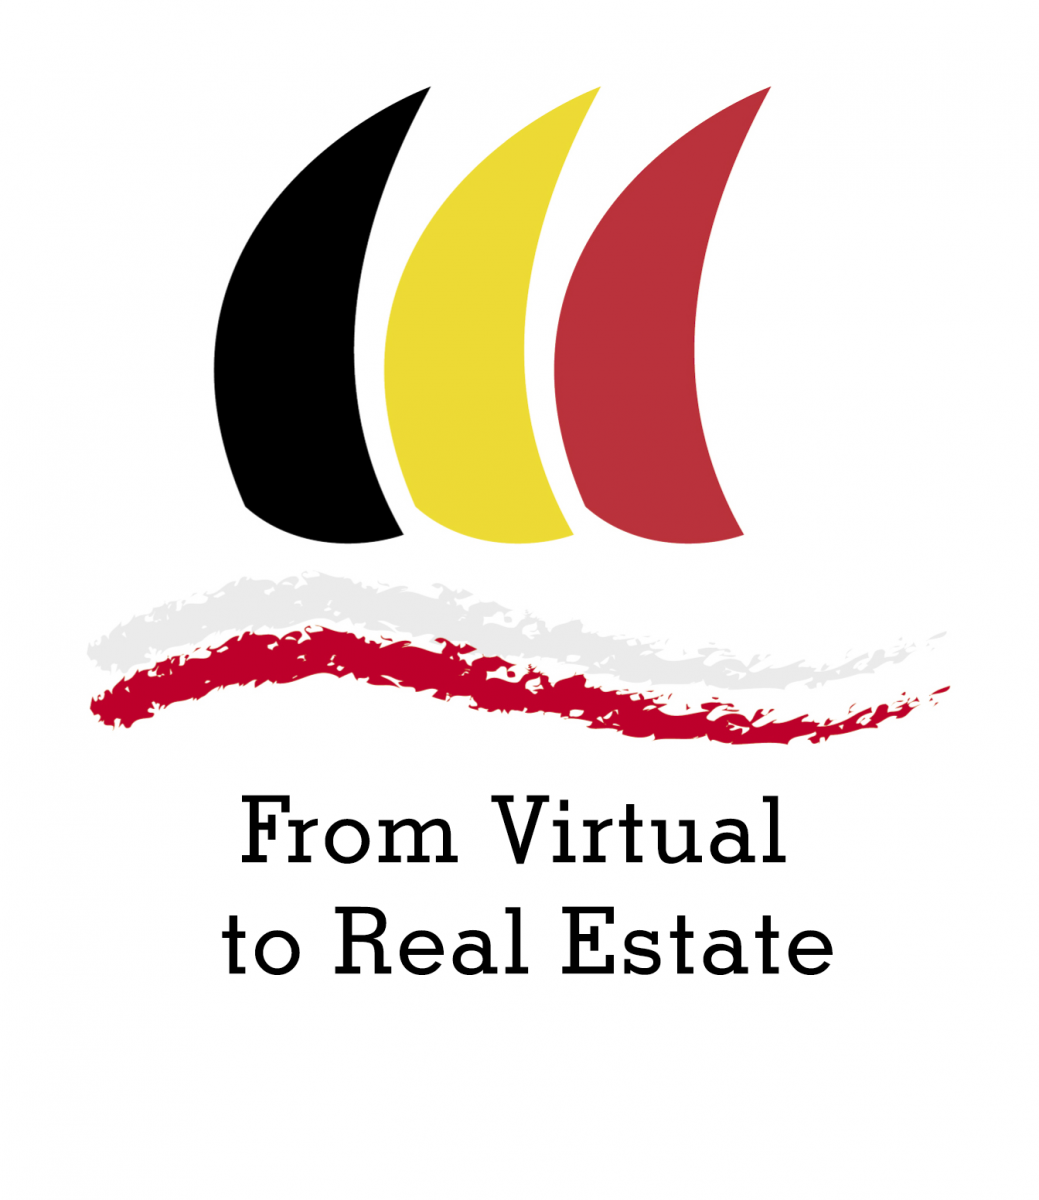 BELGIAN DAYS 2019: From Virtual to Real Estate – sharing Belgian know-how